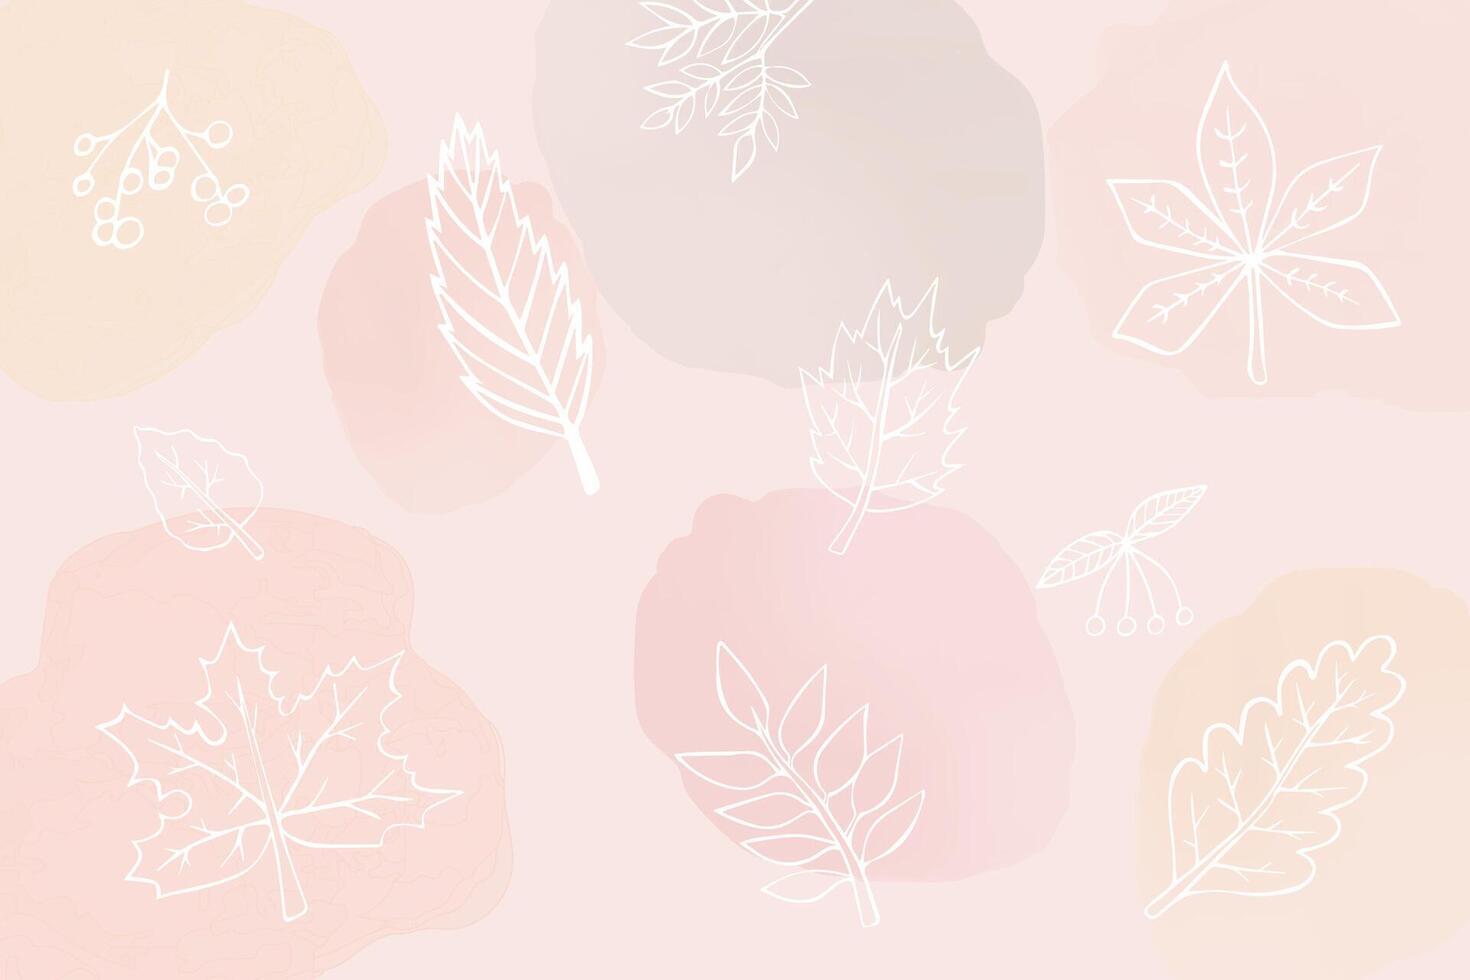 Delicate autumn background with leaves, autumn wallpaper with white leaves vector